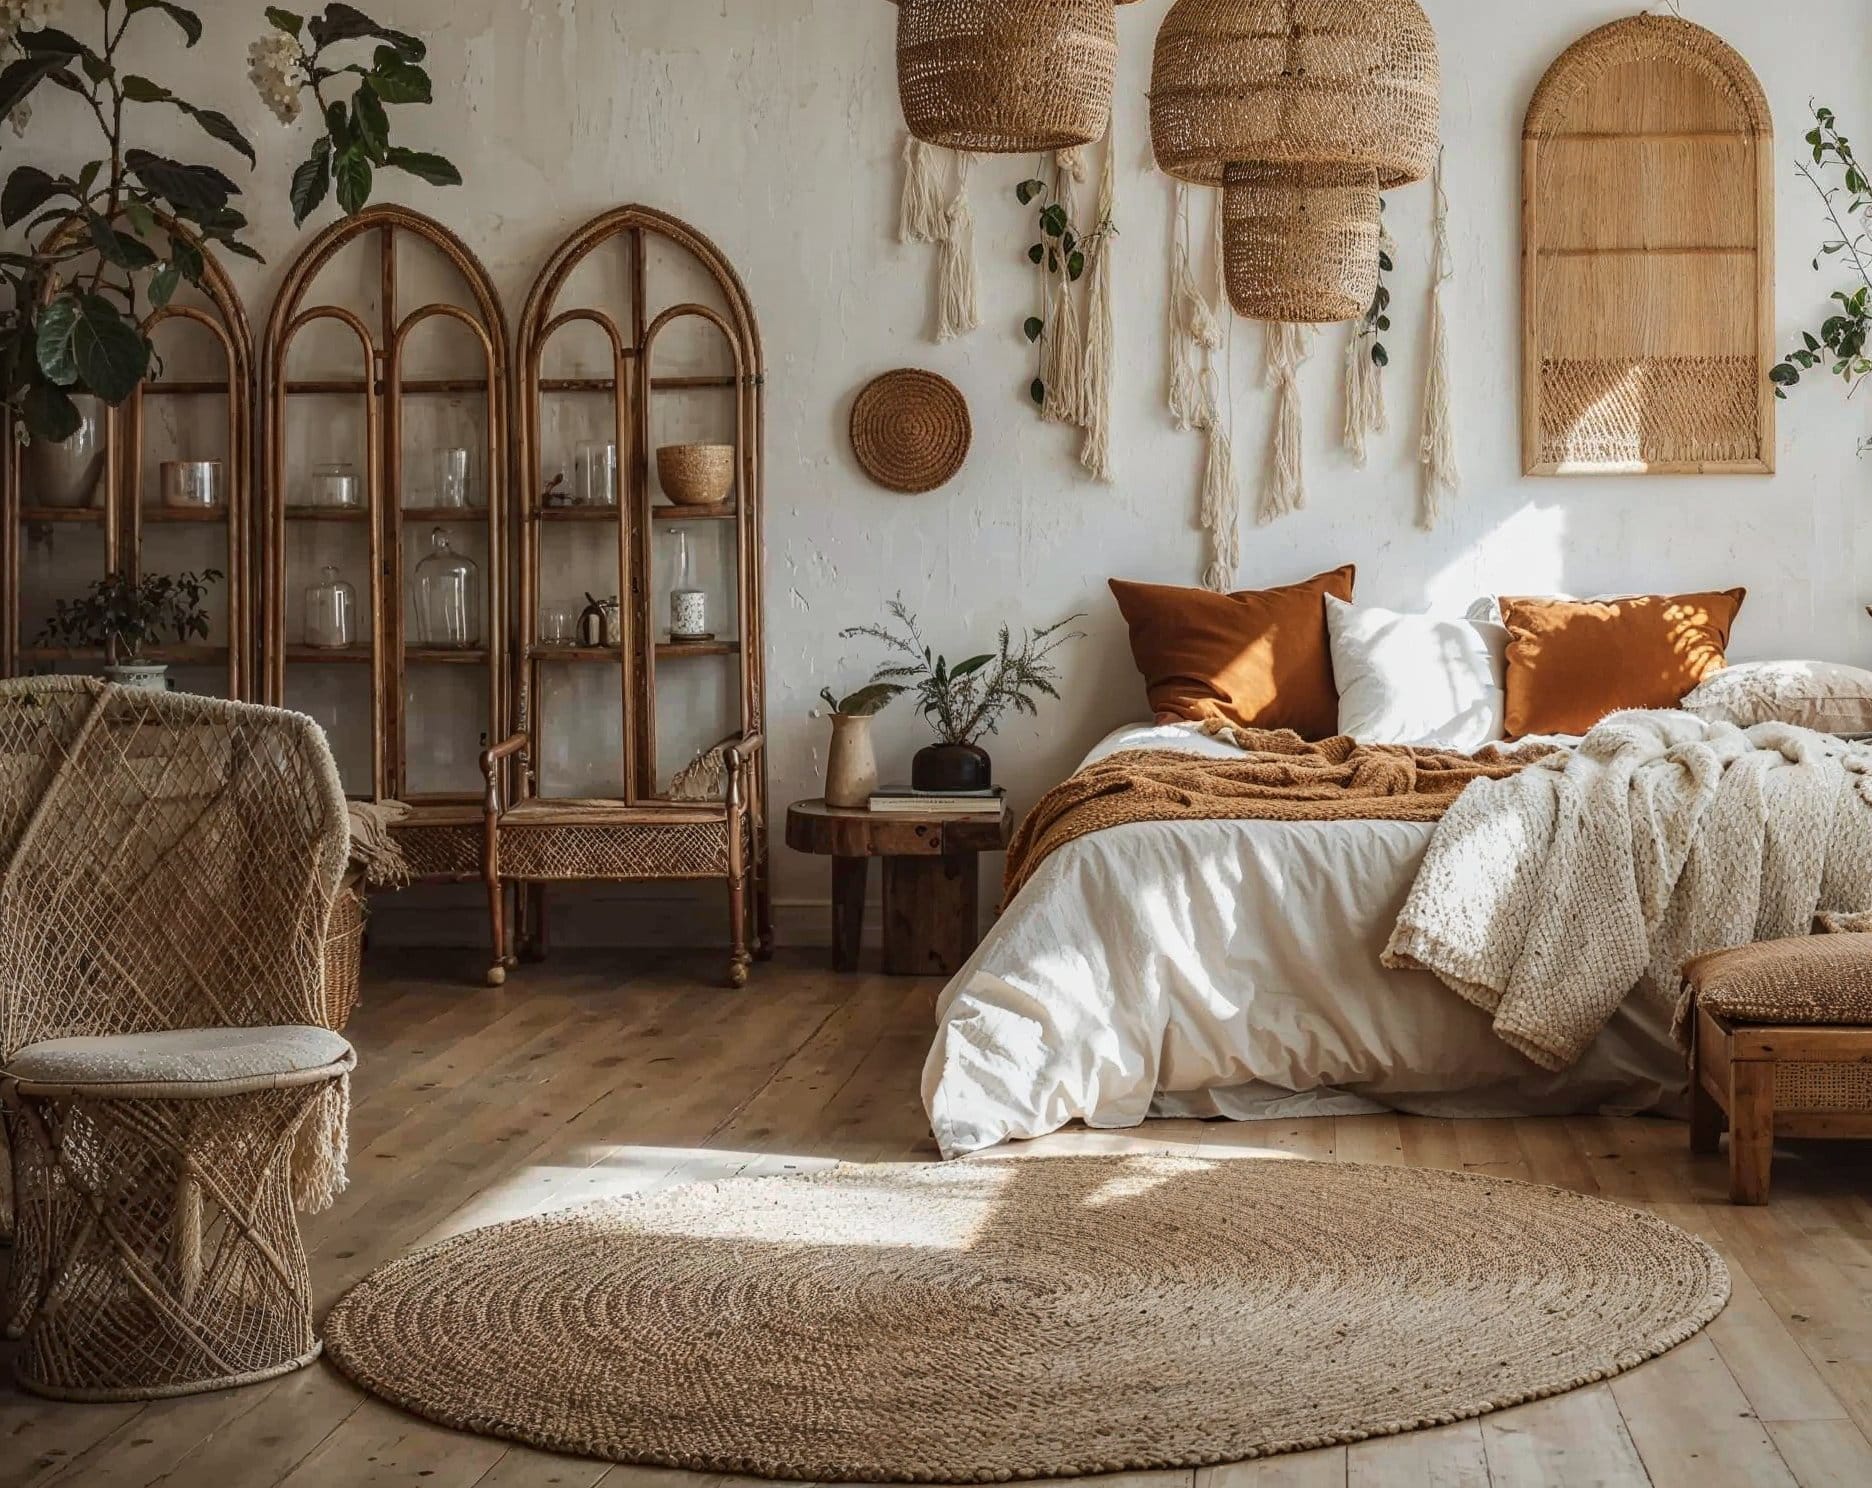 Bohemian Design Style: What It Means And How To Get The Look - Décor Aid